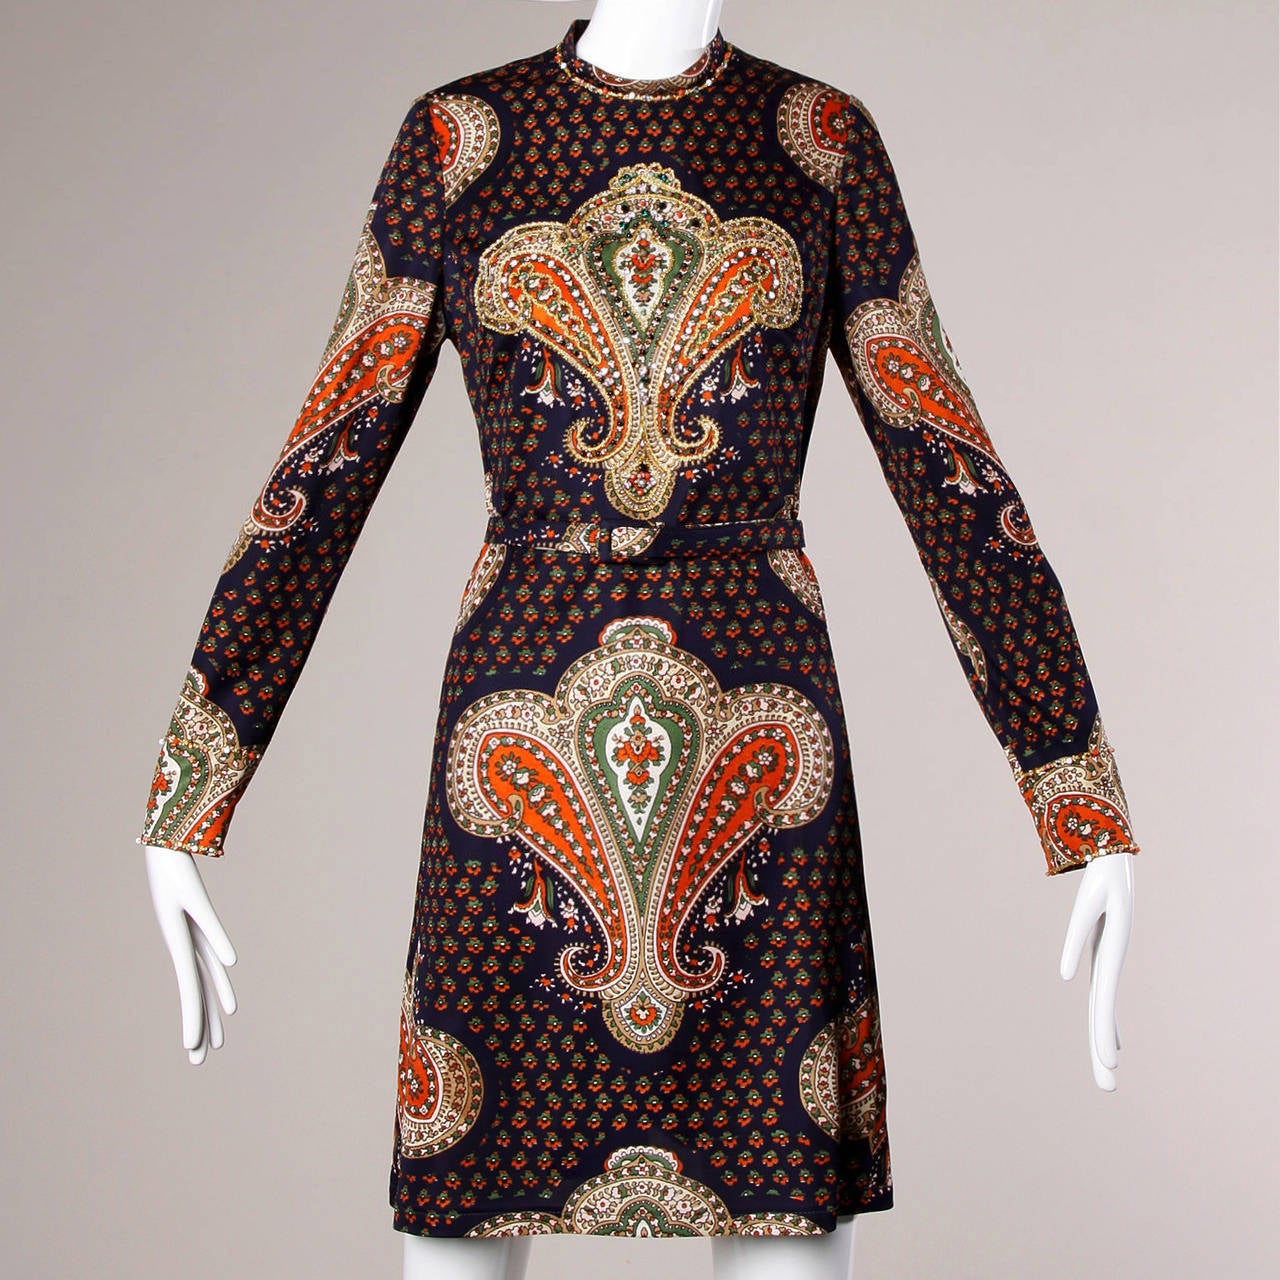 Beaded Gino Charles mini dress with an elaborate paisley print and matching belt.

Details:

Unlined
Matching Belt
Back Zip Closure
Marked Size: Not Marked
Estimated Size: Small-Medium
Color: Navy/ Orange/ Green/ White/ Multicolored